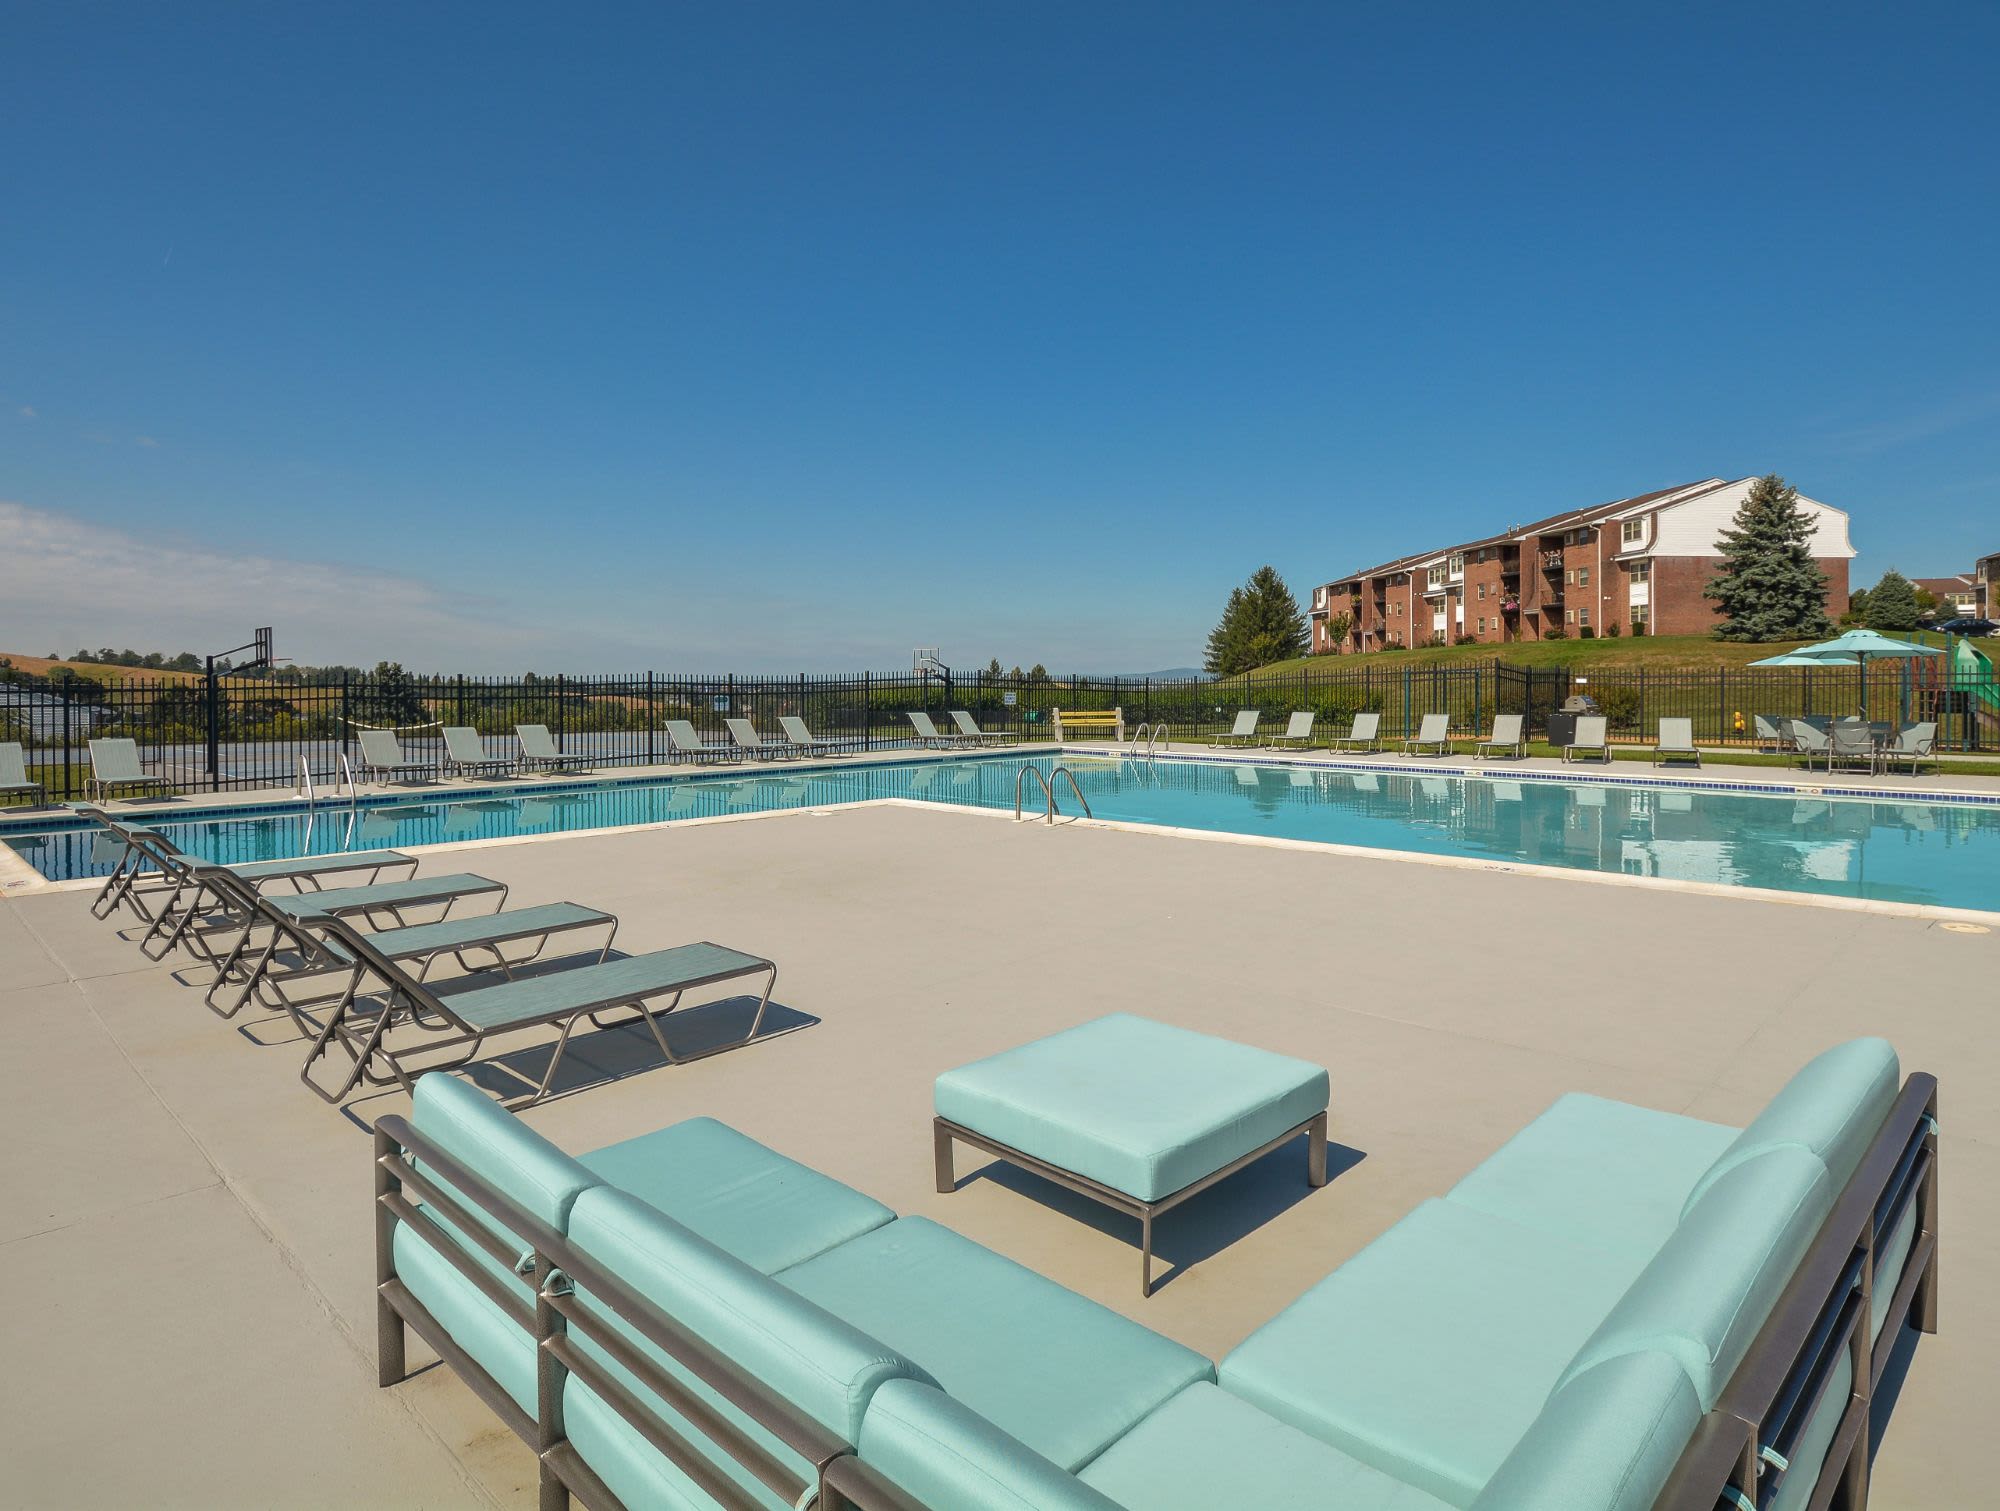 Outdoor swimming pool with chairs at Greenspring, York, Pennsylvania